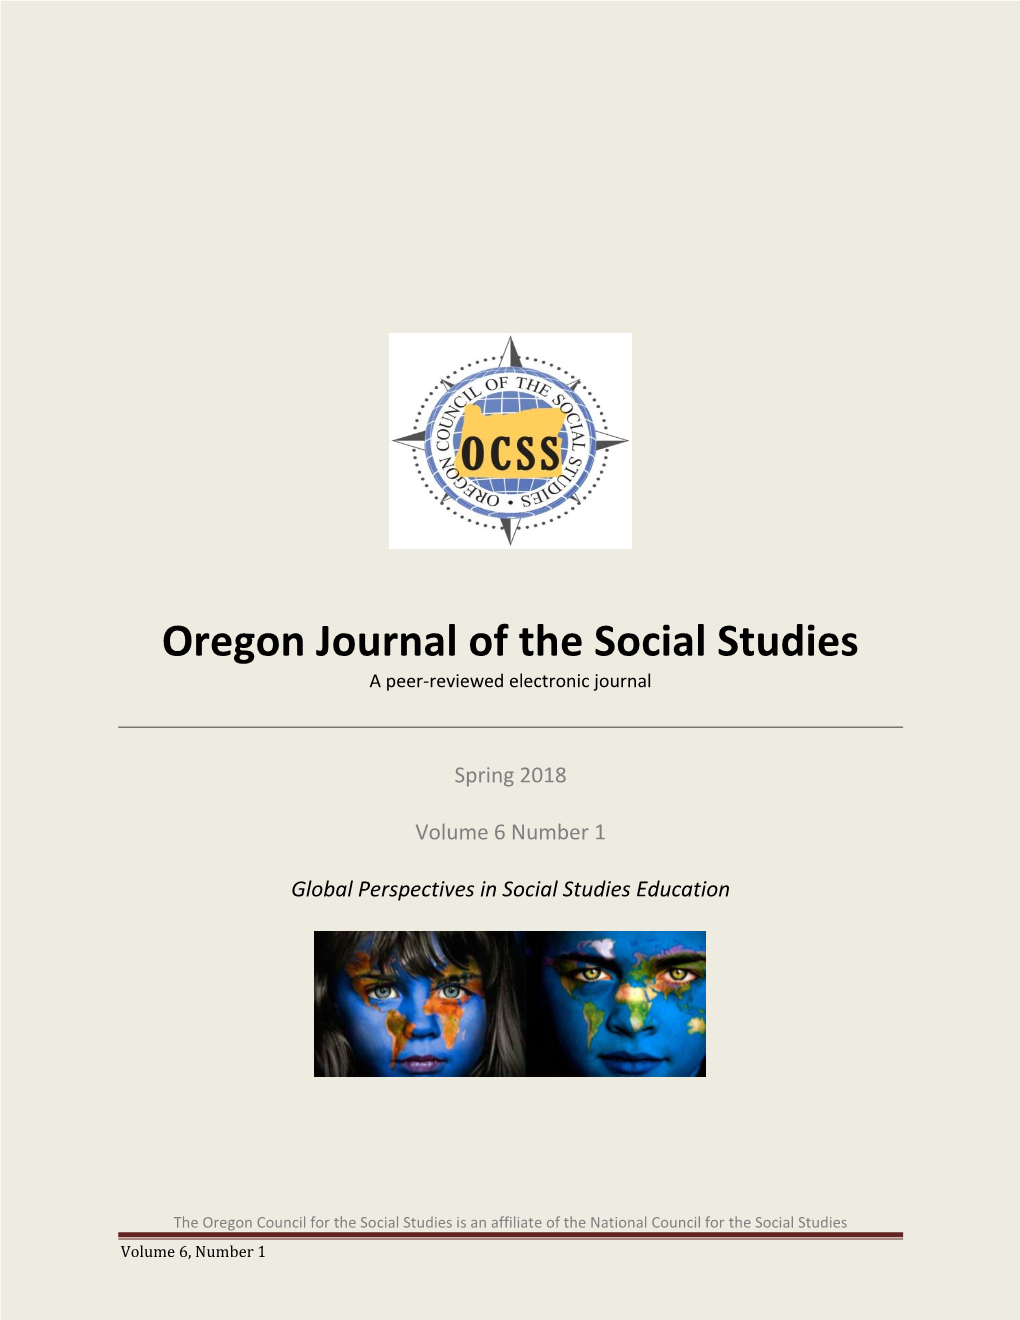 Oregon Journal of the Social Studies a Peer-Reviewed Electronic Journal